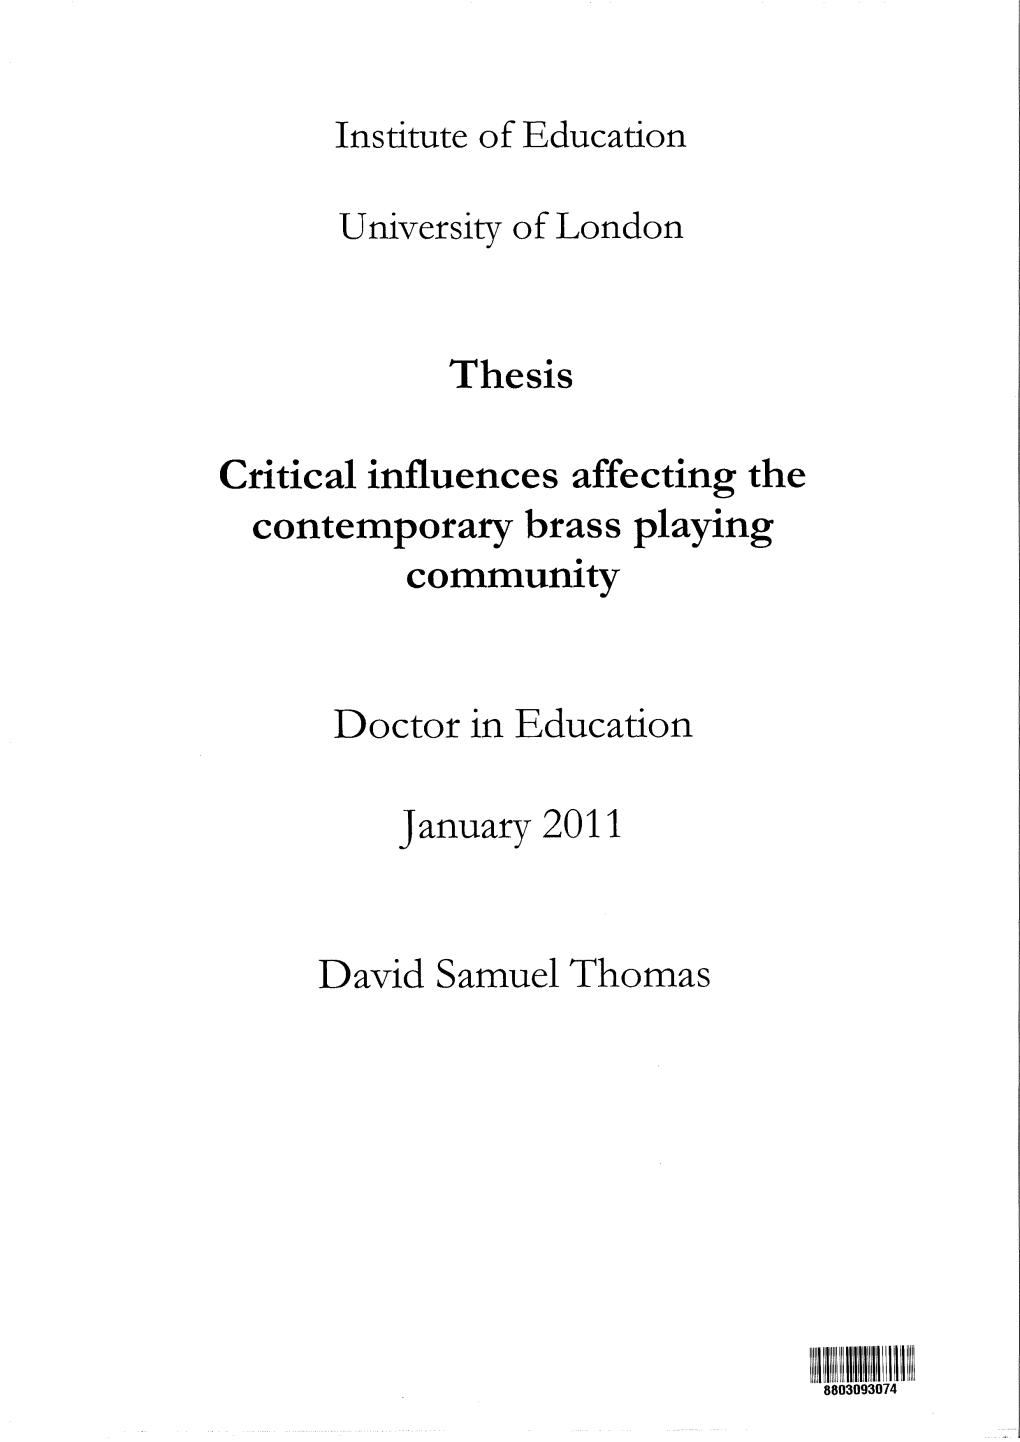 Thesis Critical Influences Affecting the Contemporary Brass Playing